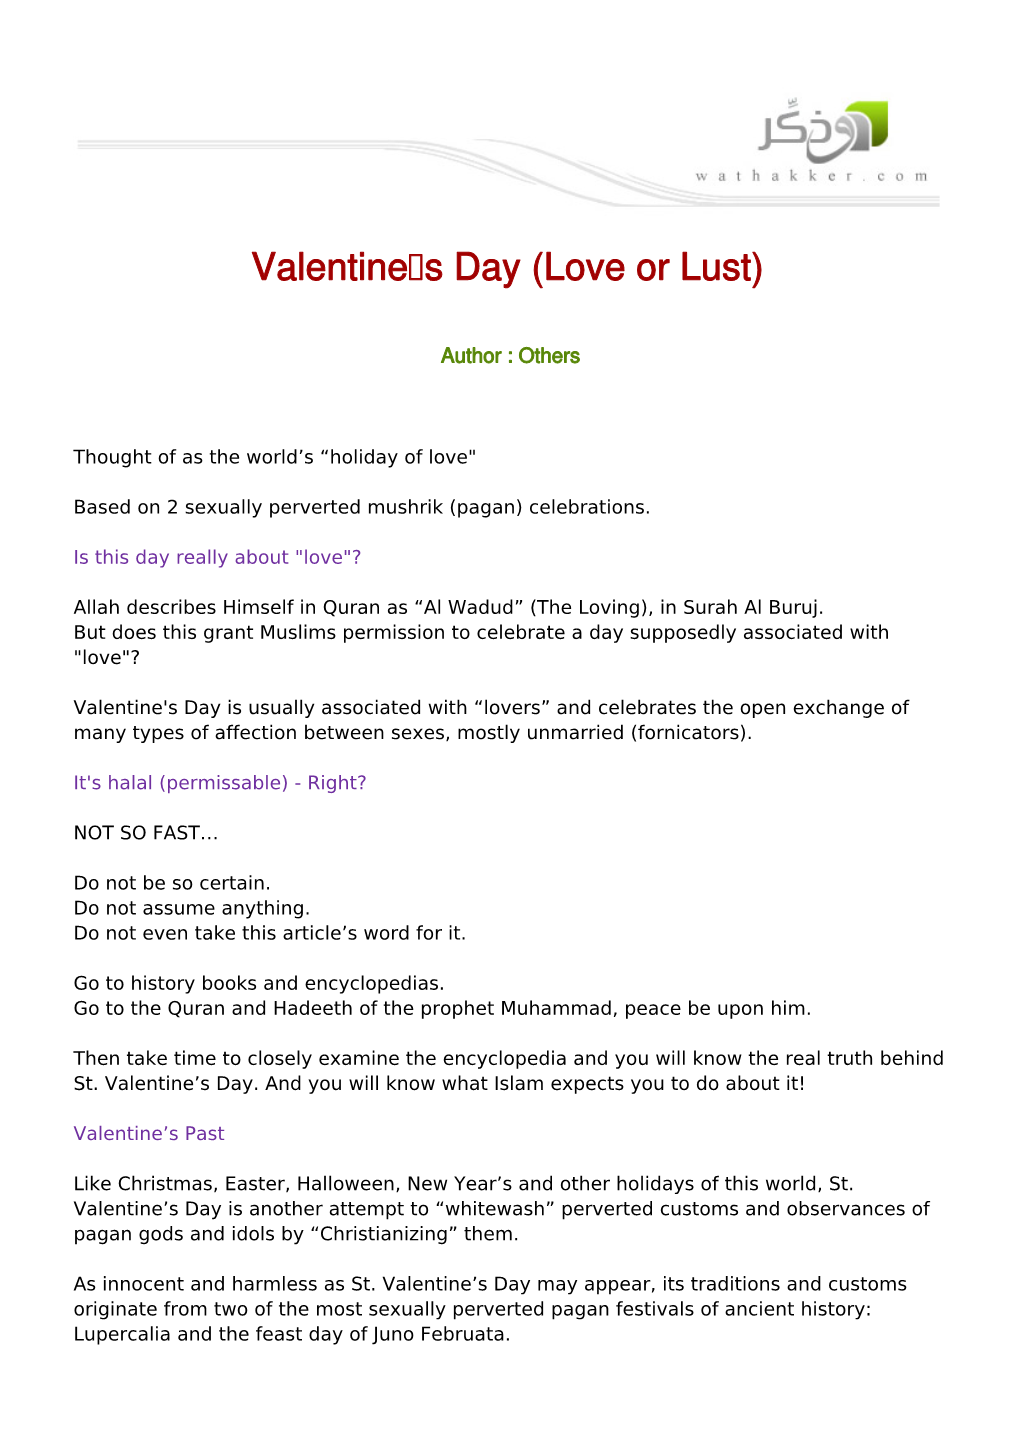 Valentine's Day Is Usually Associated with “Lovers” and Celebrates the Open Exchange of Many Types of Affection Between Sexes, Mostly Unmarried (Fornicators)